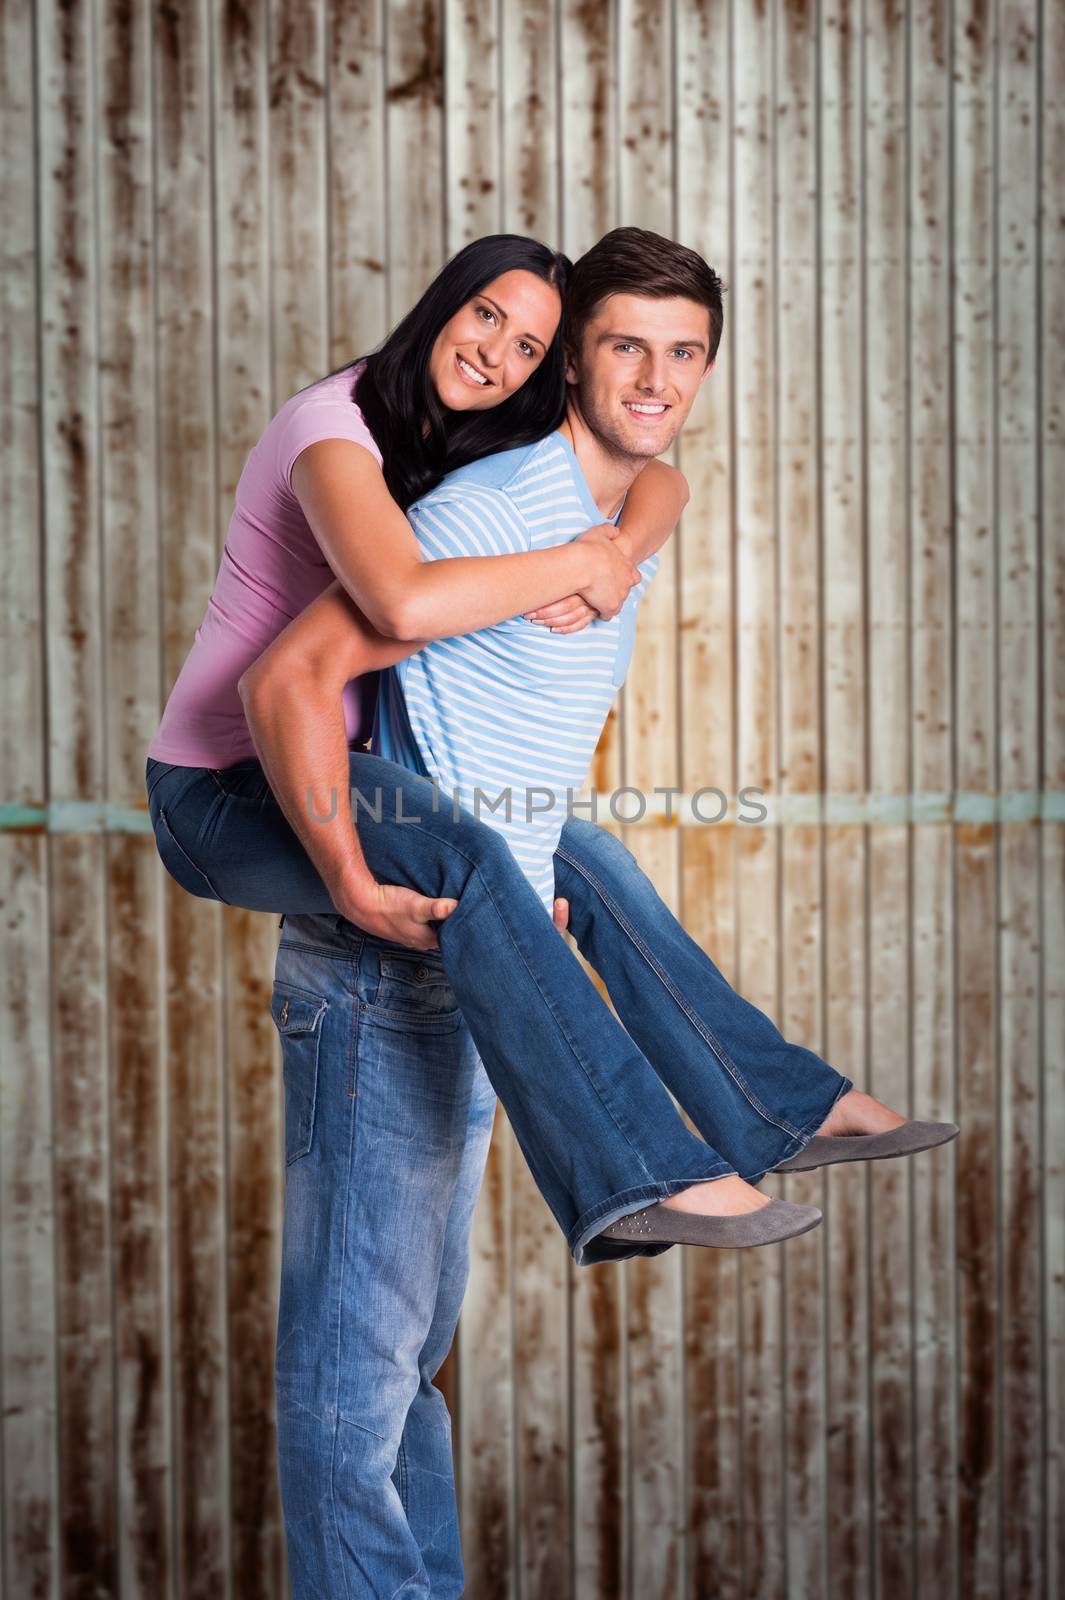 Young man giving girlfriend a piggyback ride against wooden planks